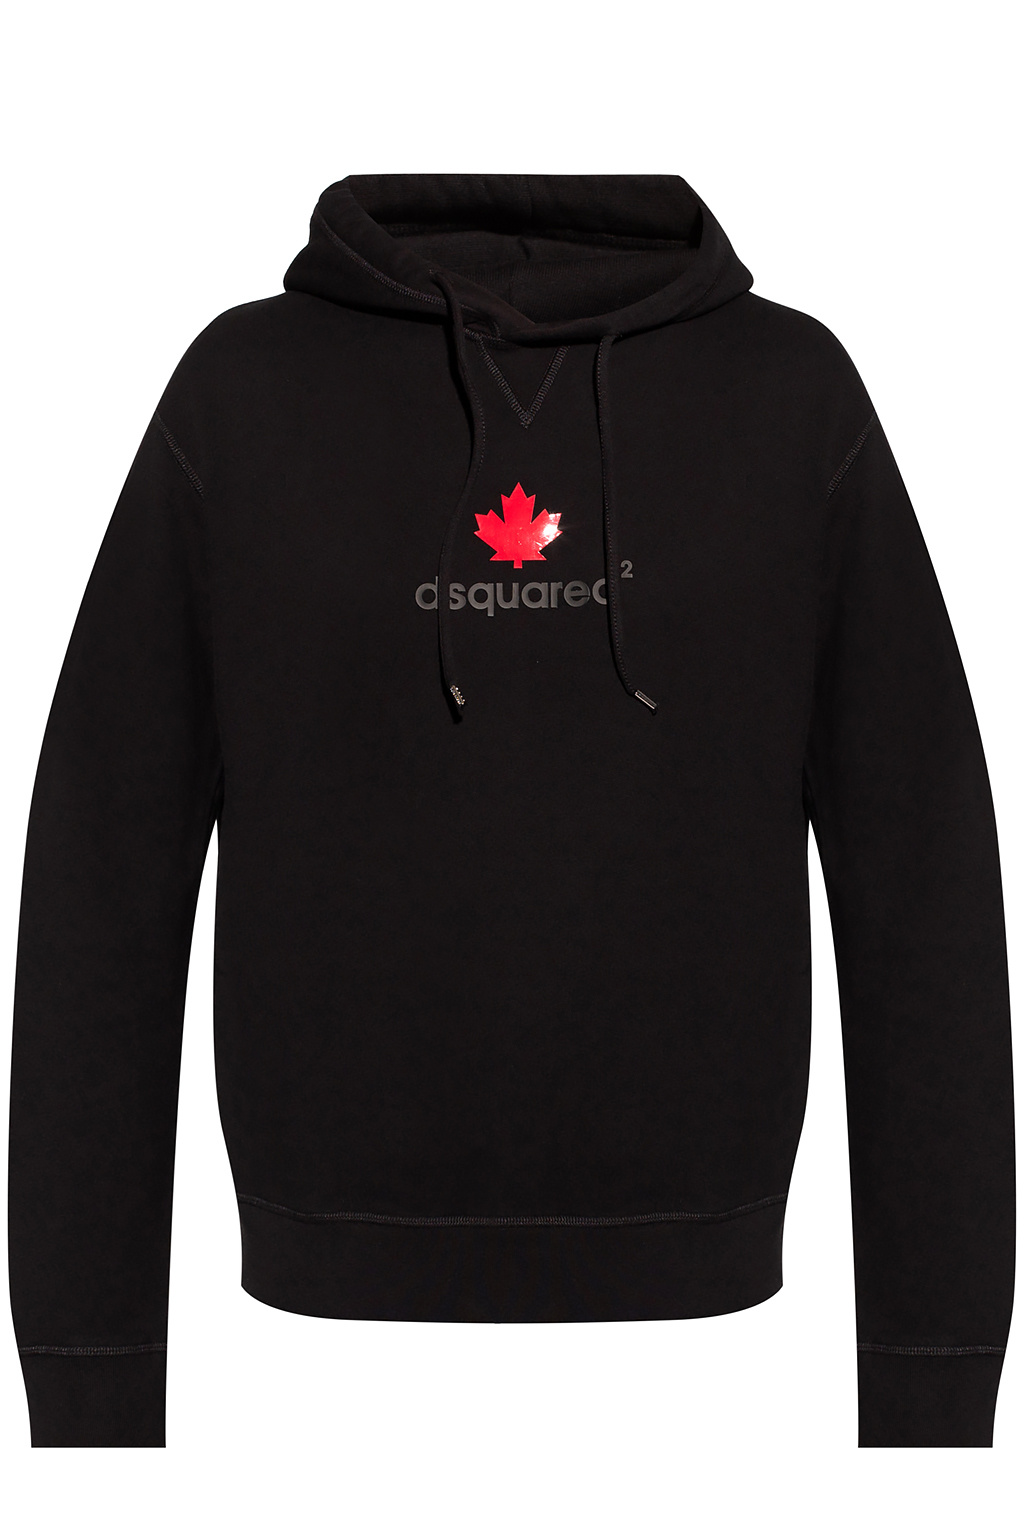 Dsquared2 Hoodie with logo | Men's Clothing | IetpShops